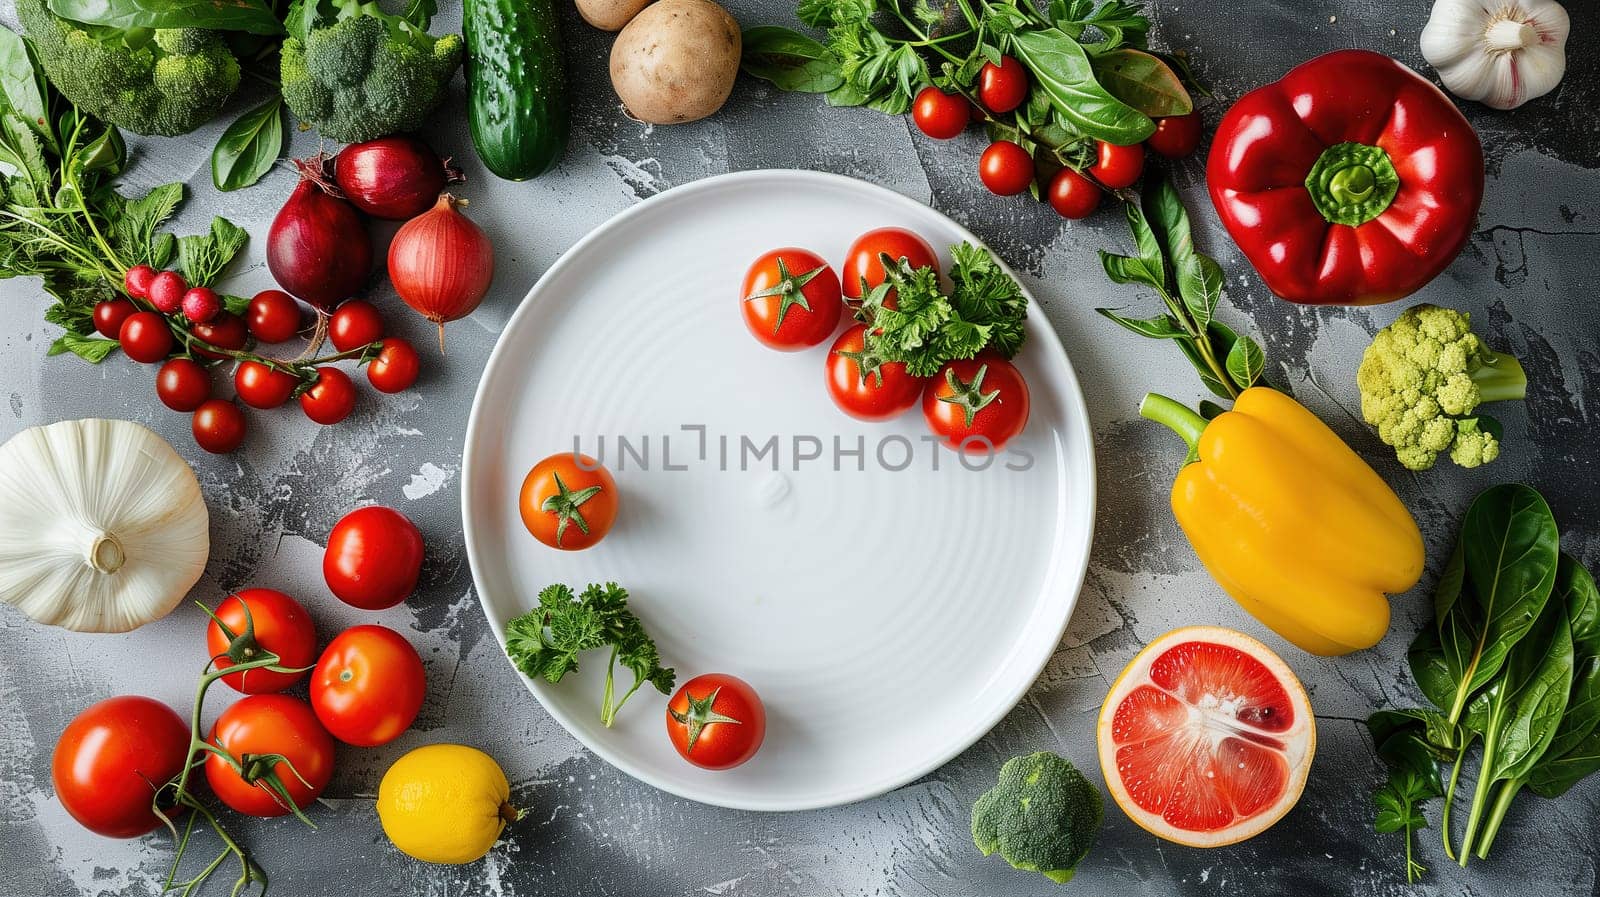 A white plate is filled with various kinds of colorful and fresh vegetables, creating a vibrant and healthy meal. The assortment includes lettuce, tomatoes, cucumbers, carrots, bell peppers, and more, arranged neatly to showcase the diversity of flavors and textures.